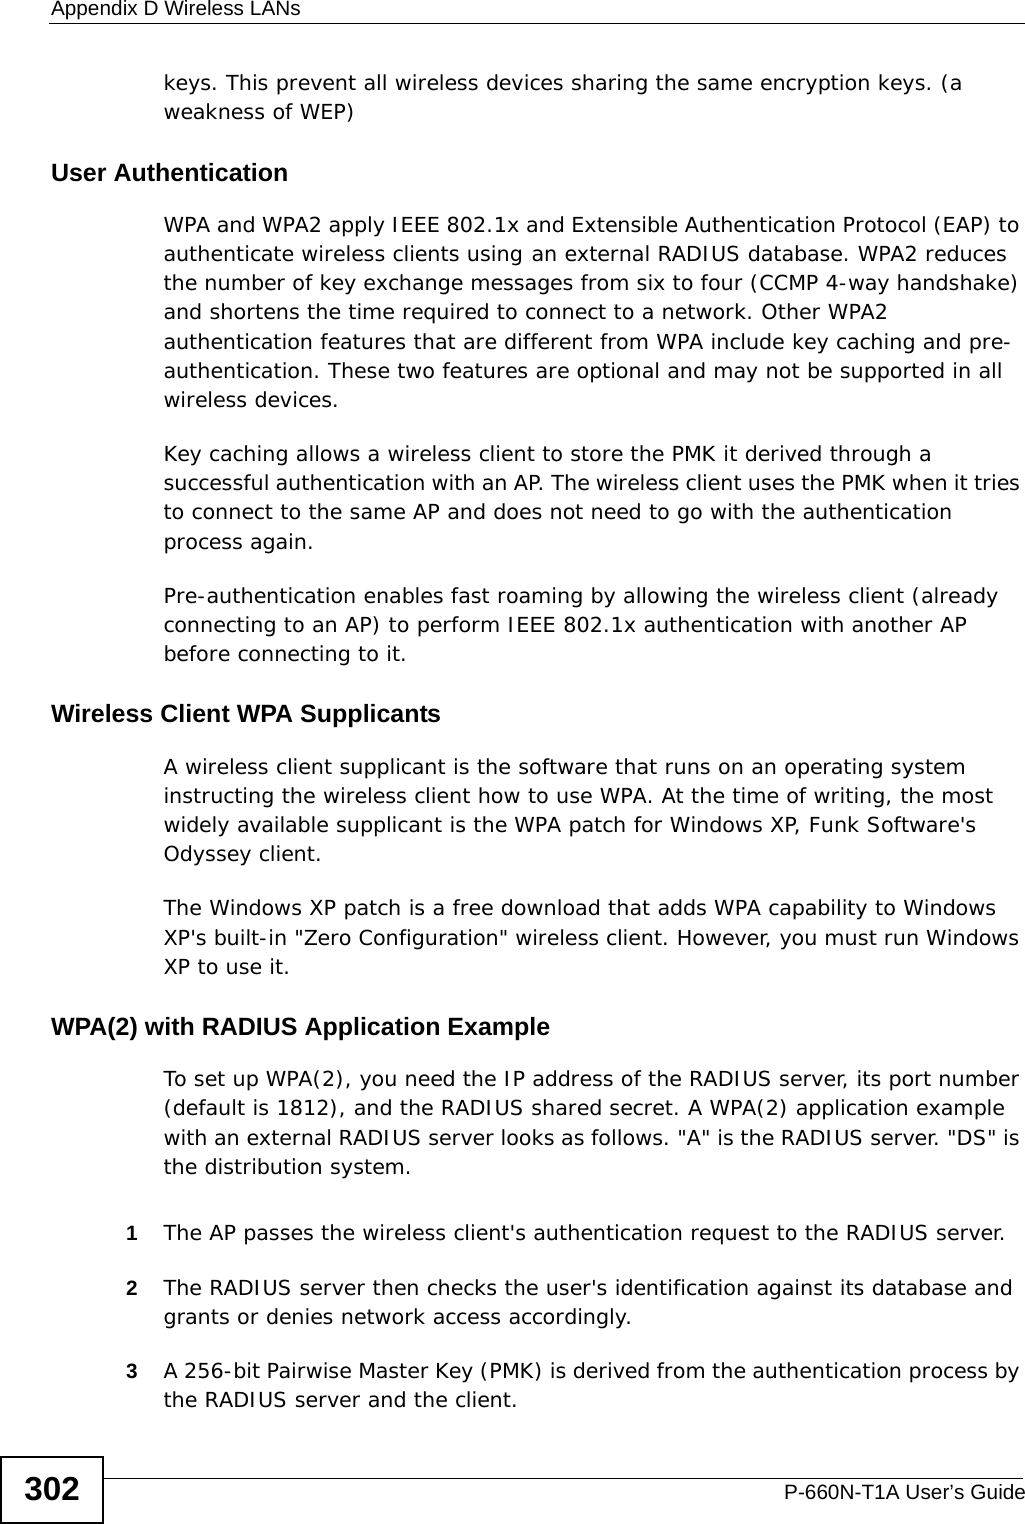 Appendix D Wireless LANsP-660N-T1A User’s Guide302keys. This prevent all wireless devices sharing the same encryption keys. (a weakness of WEP)User Authentication WPA and WPA2 apply IEEE 802.1x and Extensible Authentication Protocol (EAP) to authenticate wireless clients using an external RADIUS database. WPA2 reduces the number of key exchange messages from six to four (CCMP 4-way handshake) and shortens the time required to connect to a network. Other WPA2 authentication features that are different from WPA include key caching and pre-authentication. These two features are optional and may not be supported in all wireless devices.Key caching allows a wireless client to store the PMK it derived through a successful authentication with an AP. The wireless client uses the PMK when it tries to connect to the same AP and does not need to go with the authentication process again.Pre-authentication enables fast roaming by allowing the wireless client (already connecting to an AP) to perform IEEE 802.1x authentication with another AP before connecting to it.Wireless Client WPA SupplicantsA wireless client supplicant is the software that runs on an operating system instructing the wireless client how to use WPA. At the time of writing, the most widely available supplicant is the WPA patch for Windows XP, Funk Software&apos;s Odyssey client. The Windows XP patch is a free download that adds WPA capability to Windows XP&apos;s built-in &quot;Zero Configuration&quot; wireless client. However, you must run Windows XP to use it. WPA(2) with RADIUS Application ExampleTo set up WPA(2), you need the IP address of the RADIUS server, its port number (default is 1812), and the RADIUS shared secret. A WPA(2) application example with an external RADIUS server looks as follows. &quot;A&quot; is the RADIUS server. &quot;DS&quot; is the distribution system.1The AP passes the wireless client&apos;s authentication request to the RADIUS server.2The RADIUS server then checks the user&apos;s identification against its database and grants or denies network access accordingly.3A 256-bit Pairwise Master Key (PMK) is derived from the authentication process by the RADIUS server and the client.